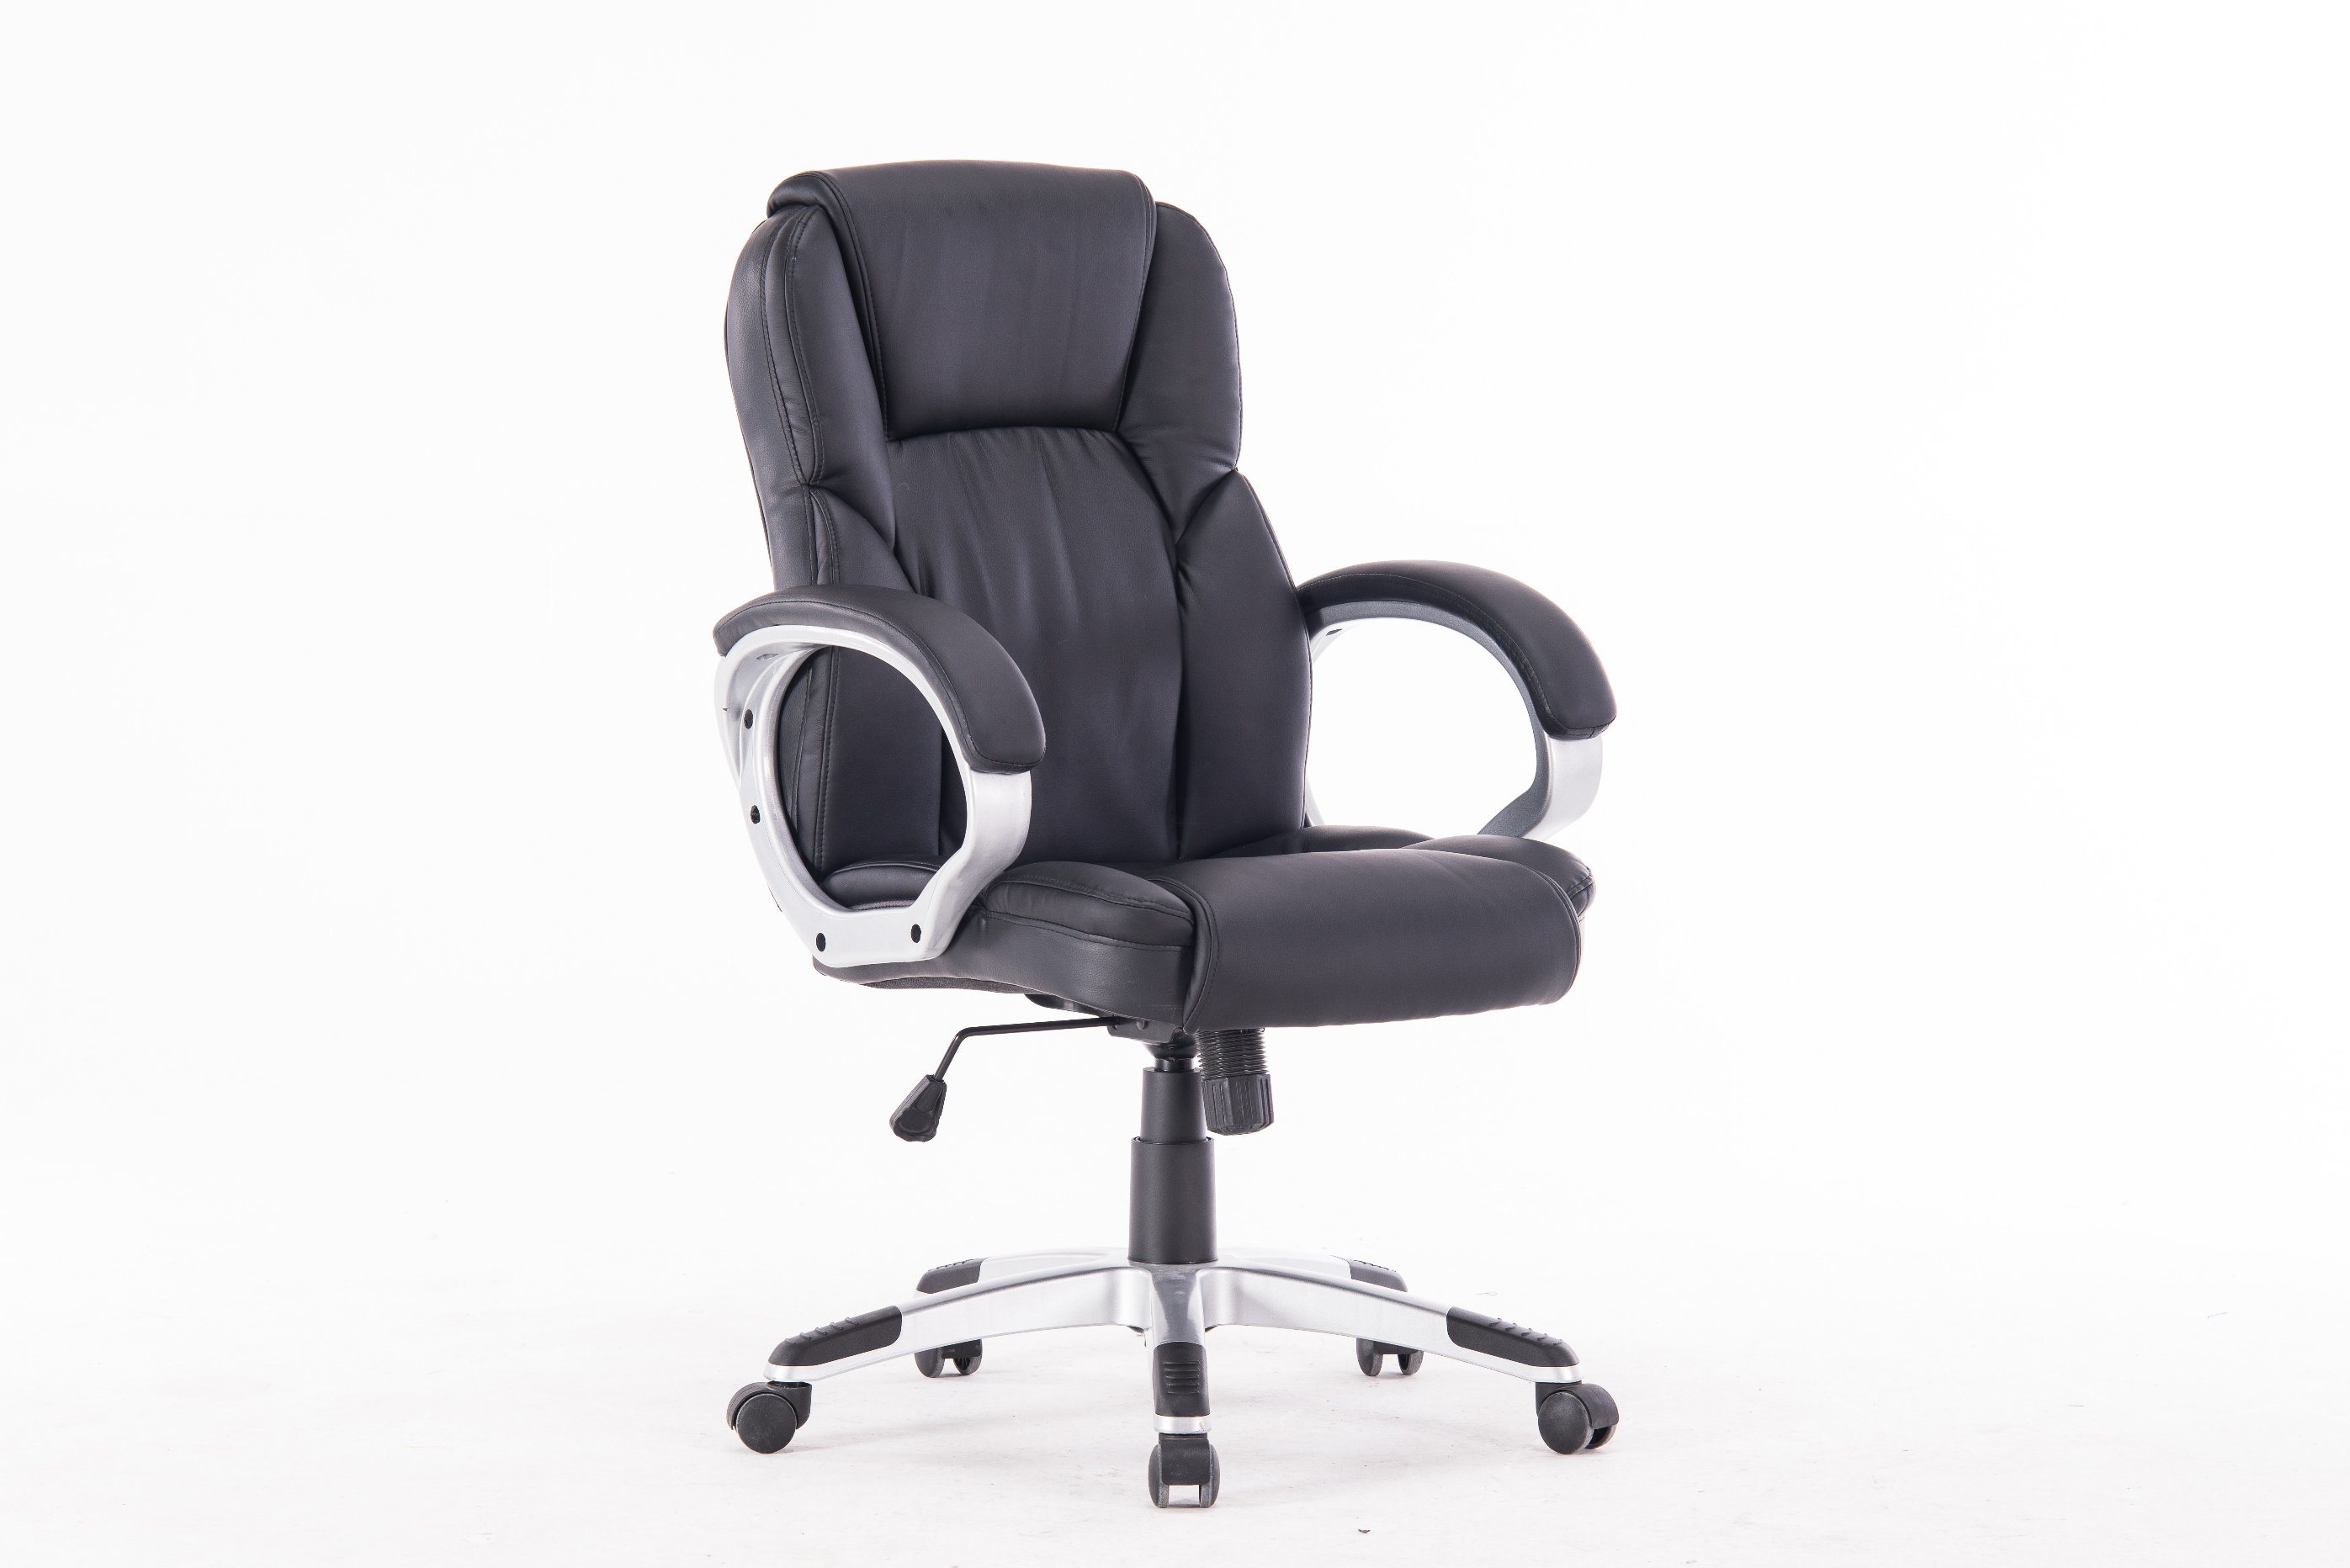 High Back Emes Style Swivel Leather Office Chairs with Wheels